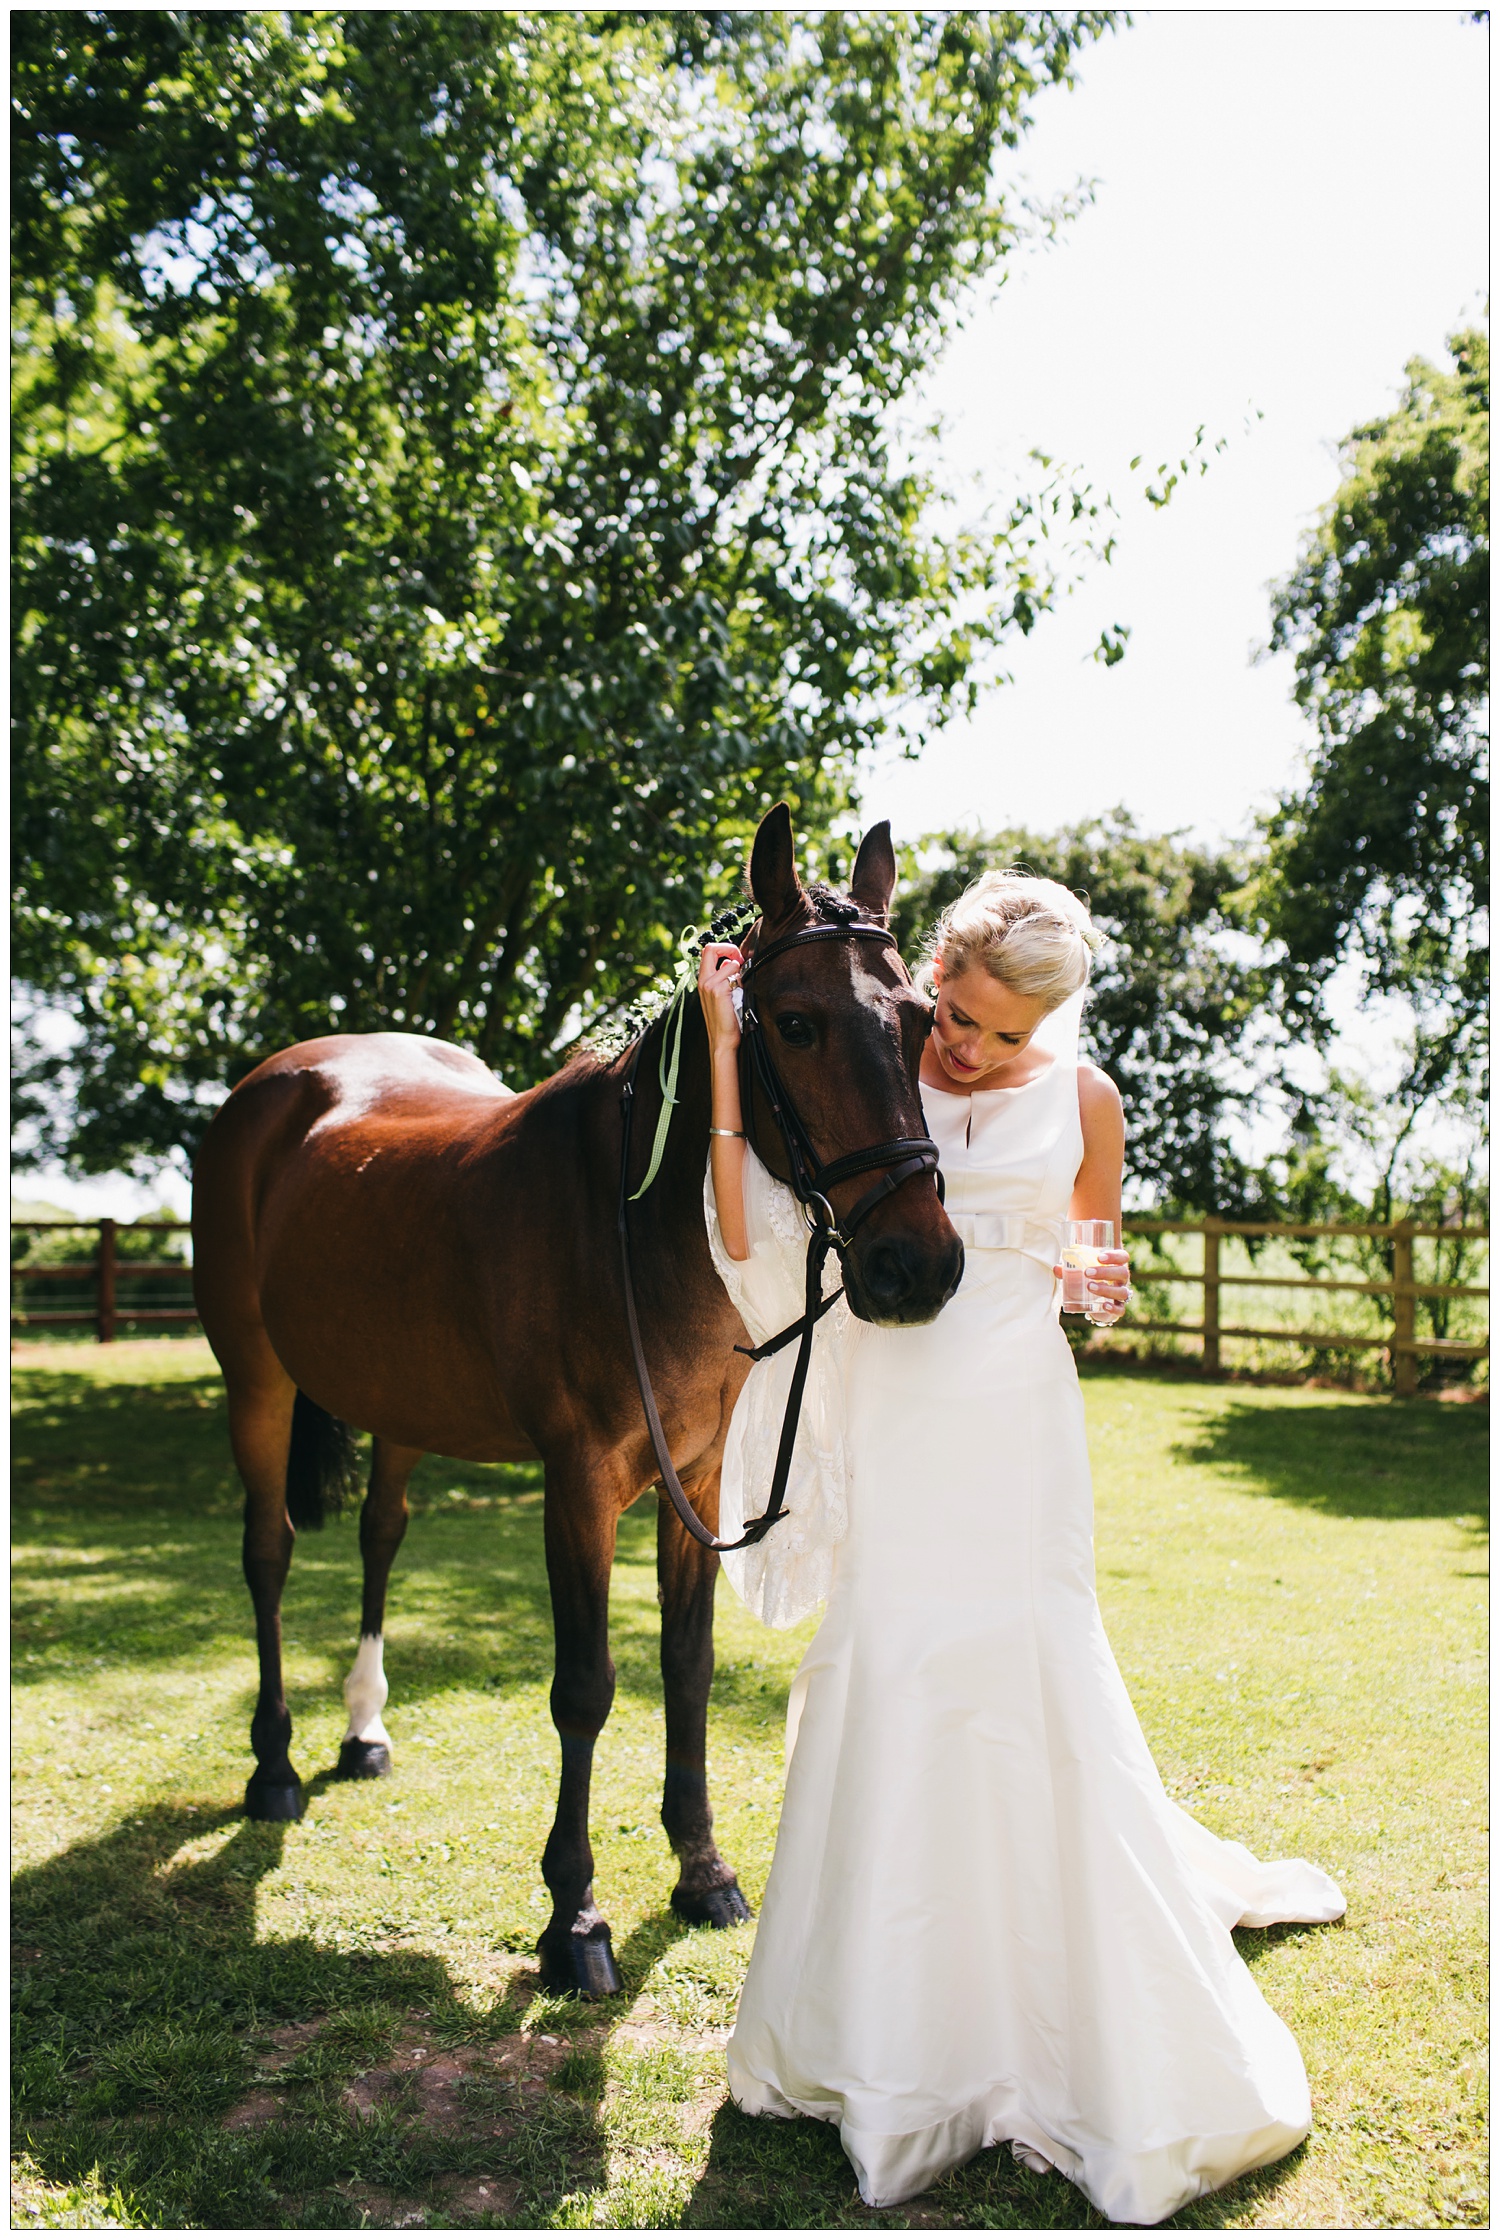 A bride hugs her horse while holding a drink.